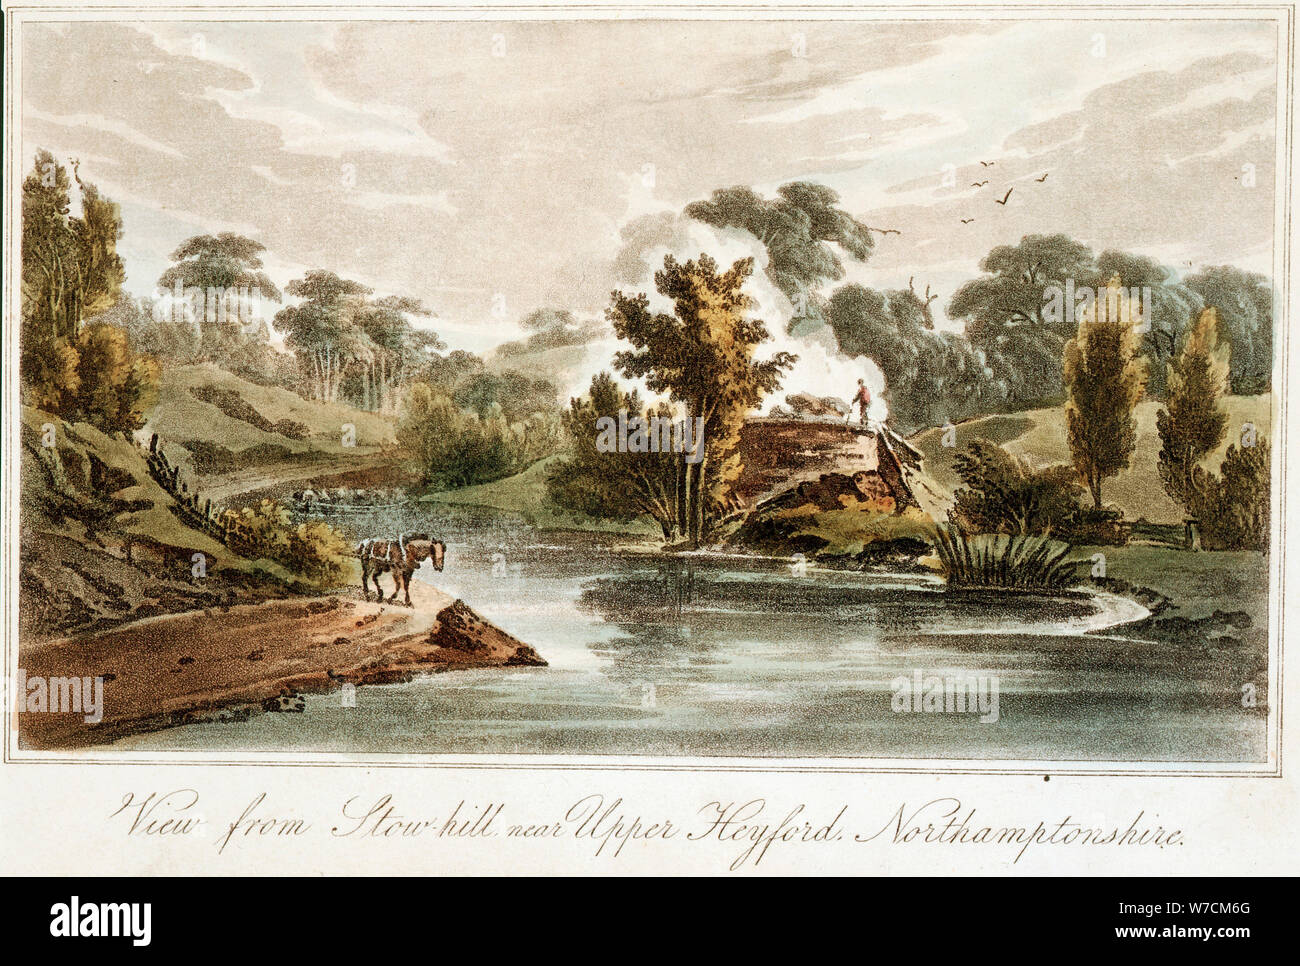 Grand Junction Canal from Stow Hill near Upper Heyford, Northamptonshire, 1819. Artist: John Hassell Stock Photo